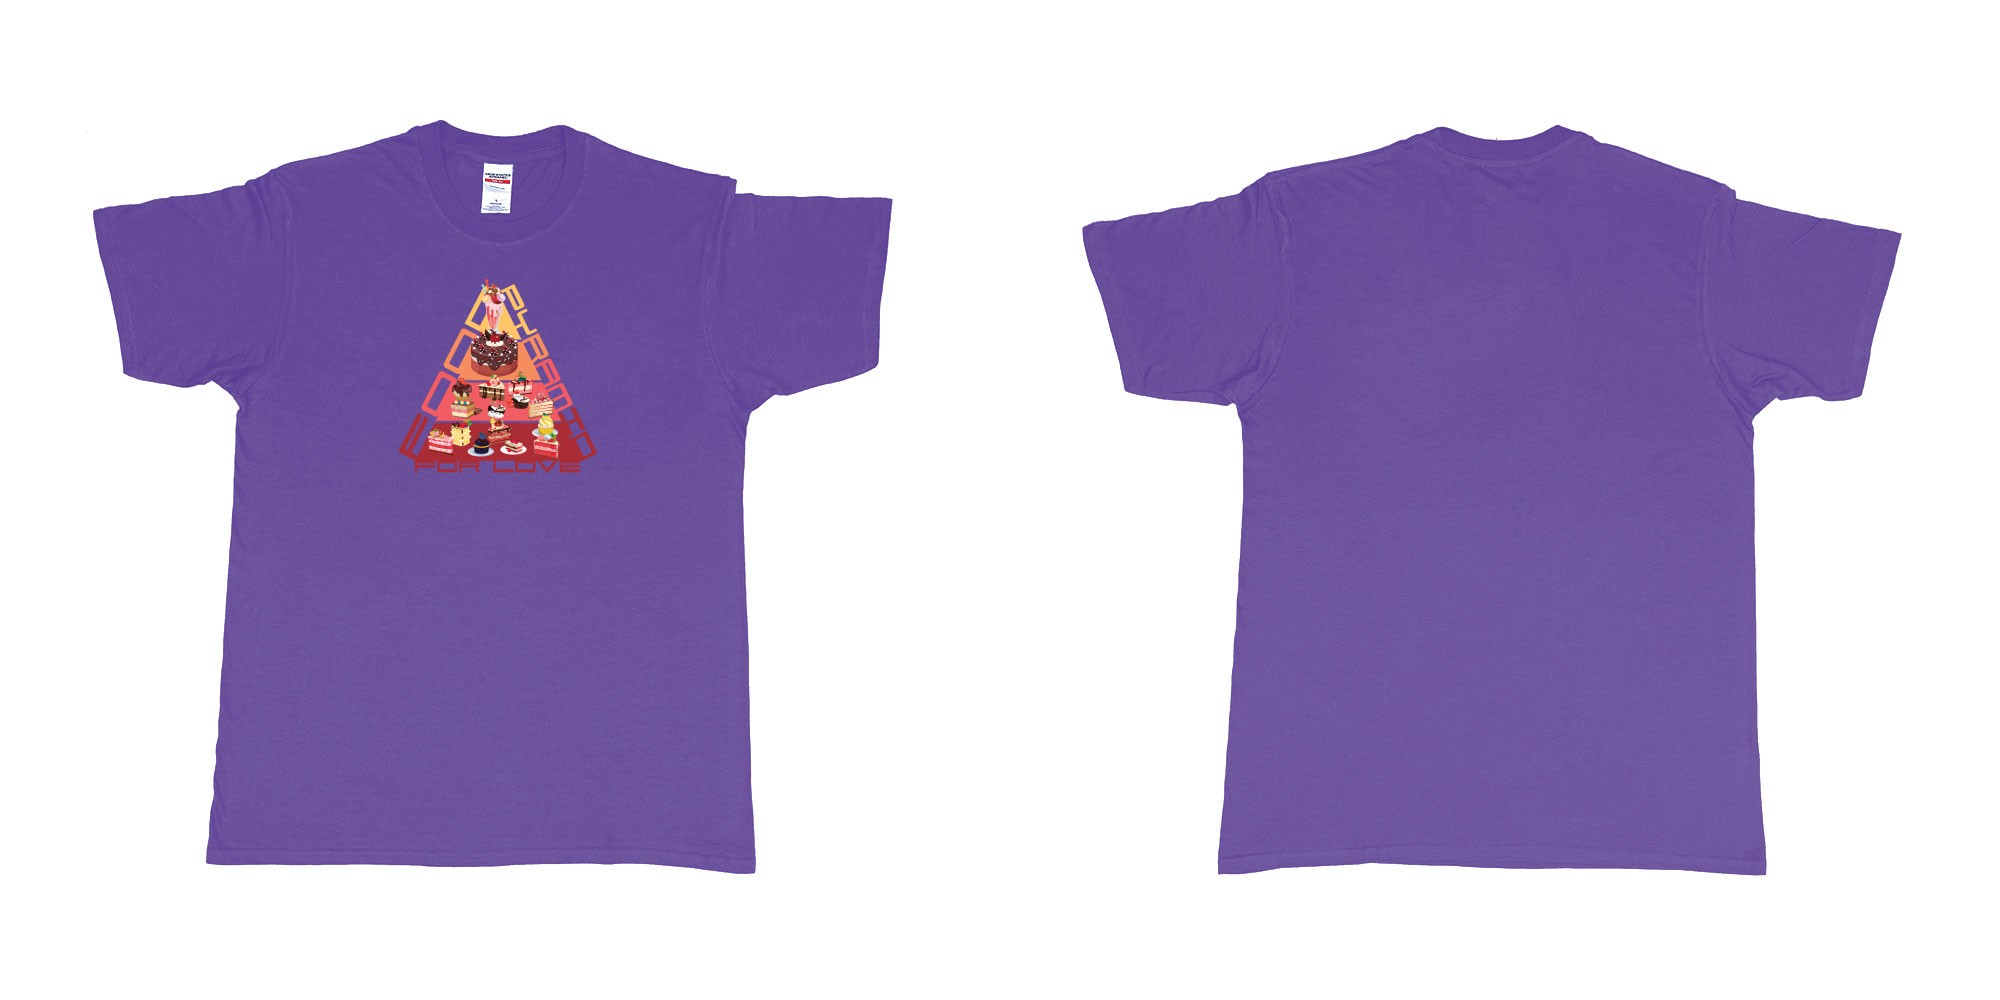 Custom tshirt design food pyramid for love in fabric color purple choice your own text made in Bali by The Pirate Way